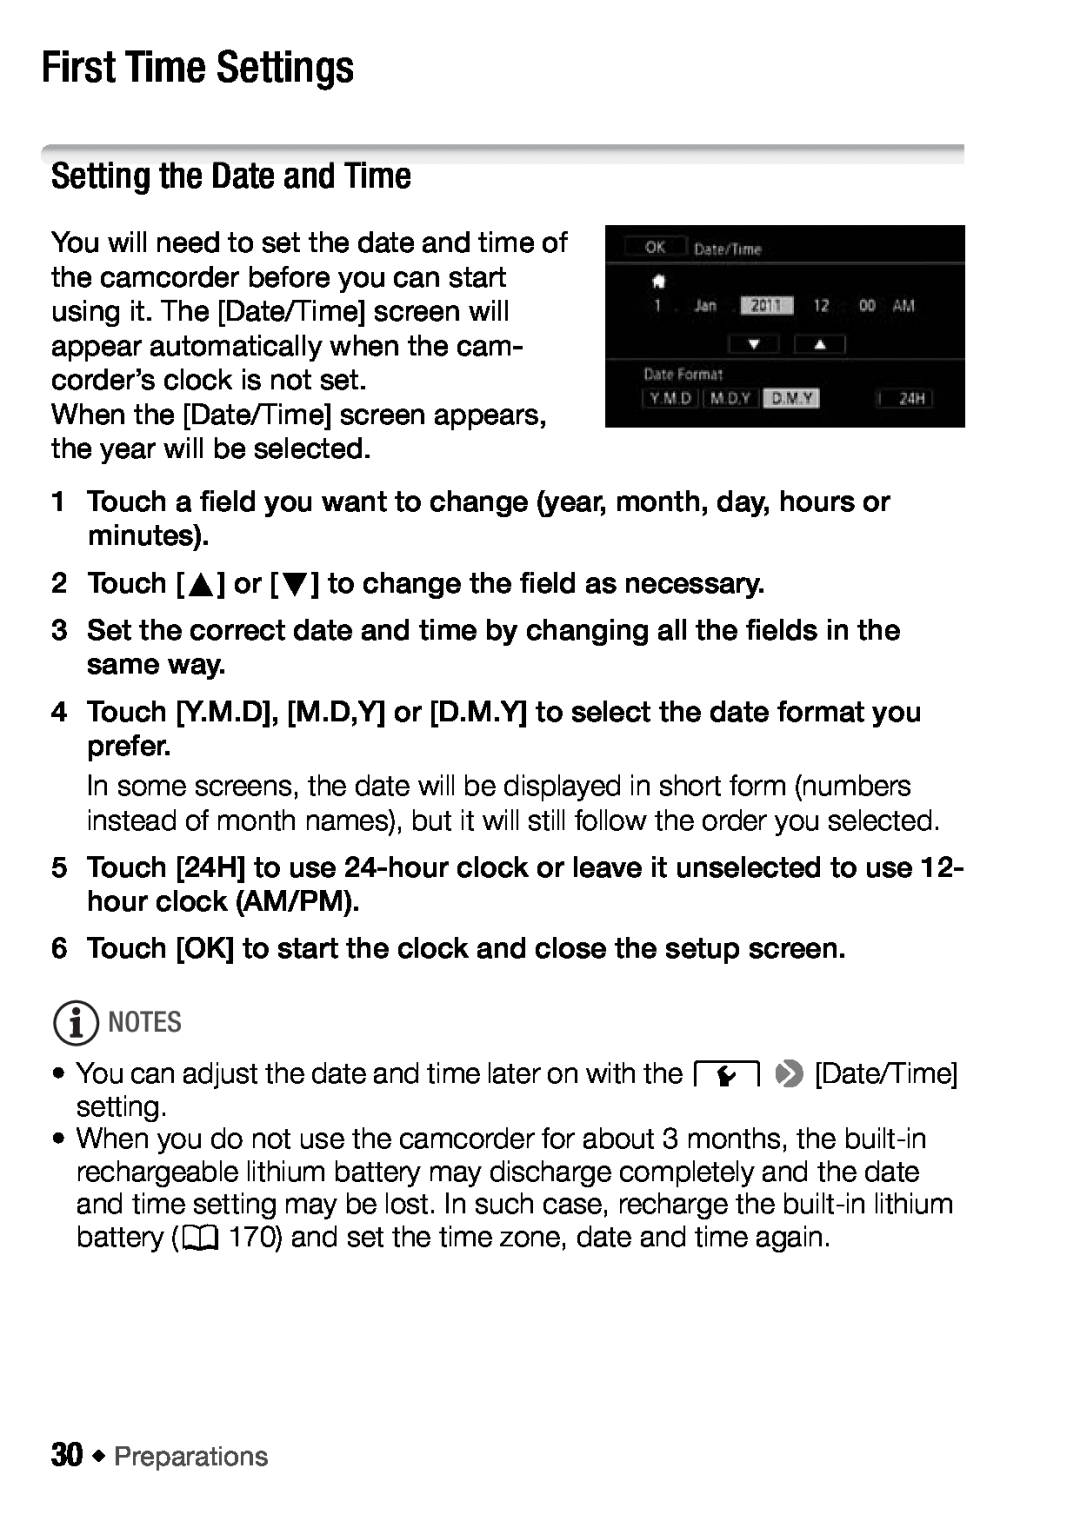 Canon HFM406, HFM46 instruction manual First Time Settings, Setting the Date and Time 